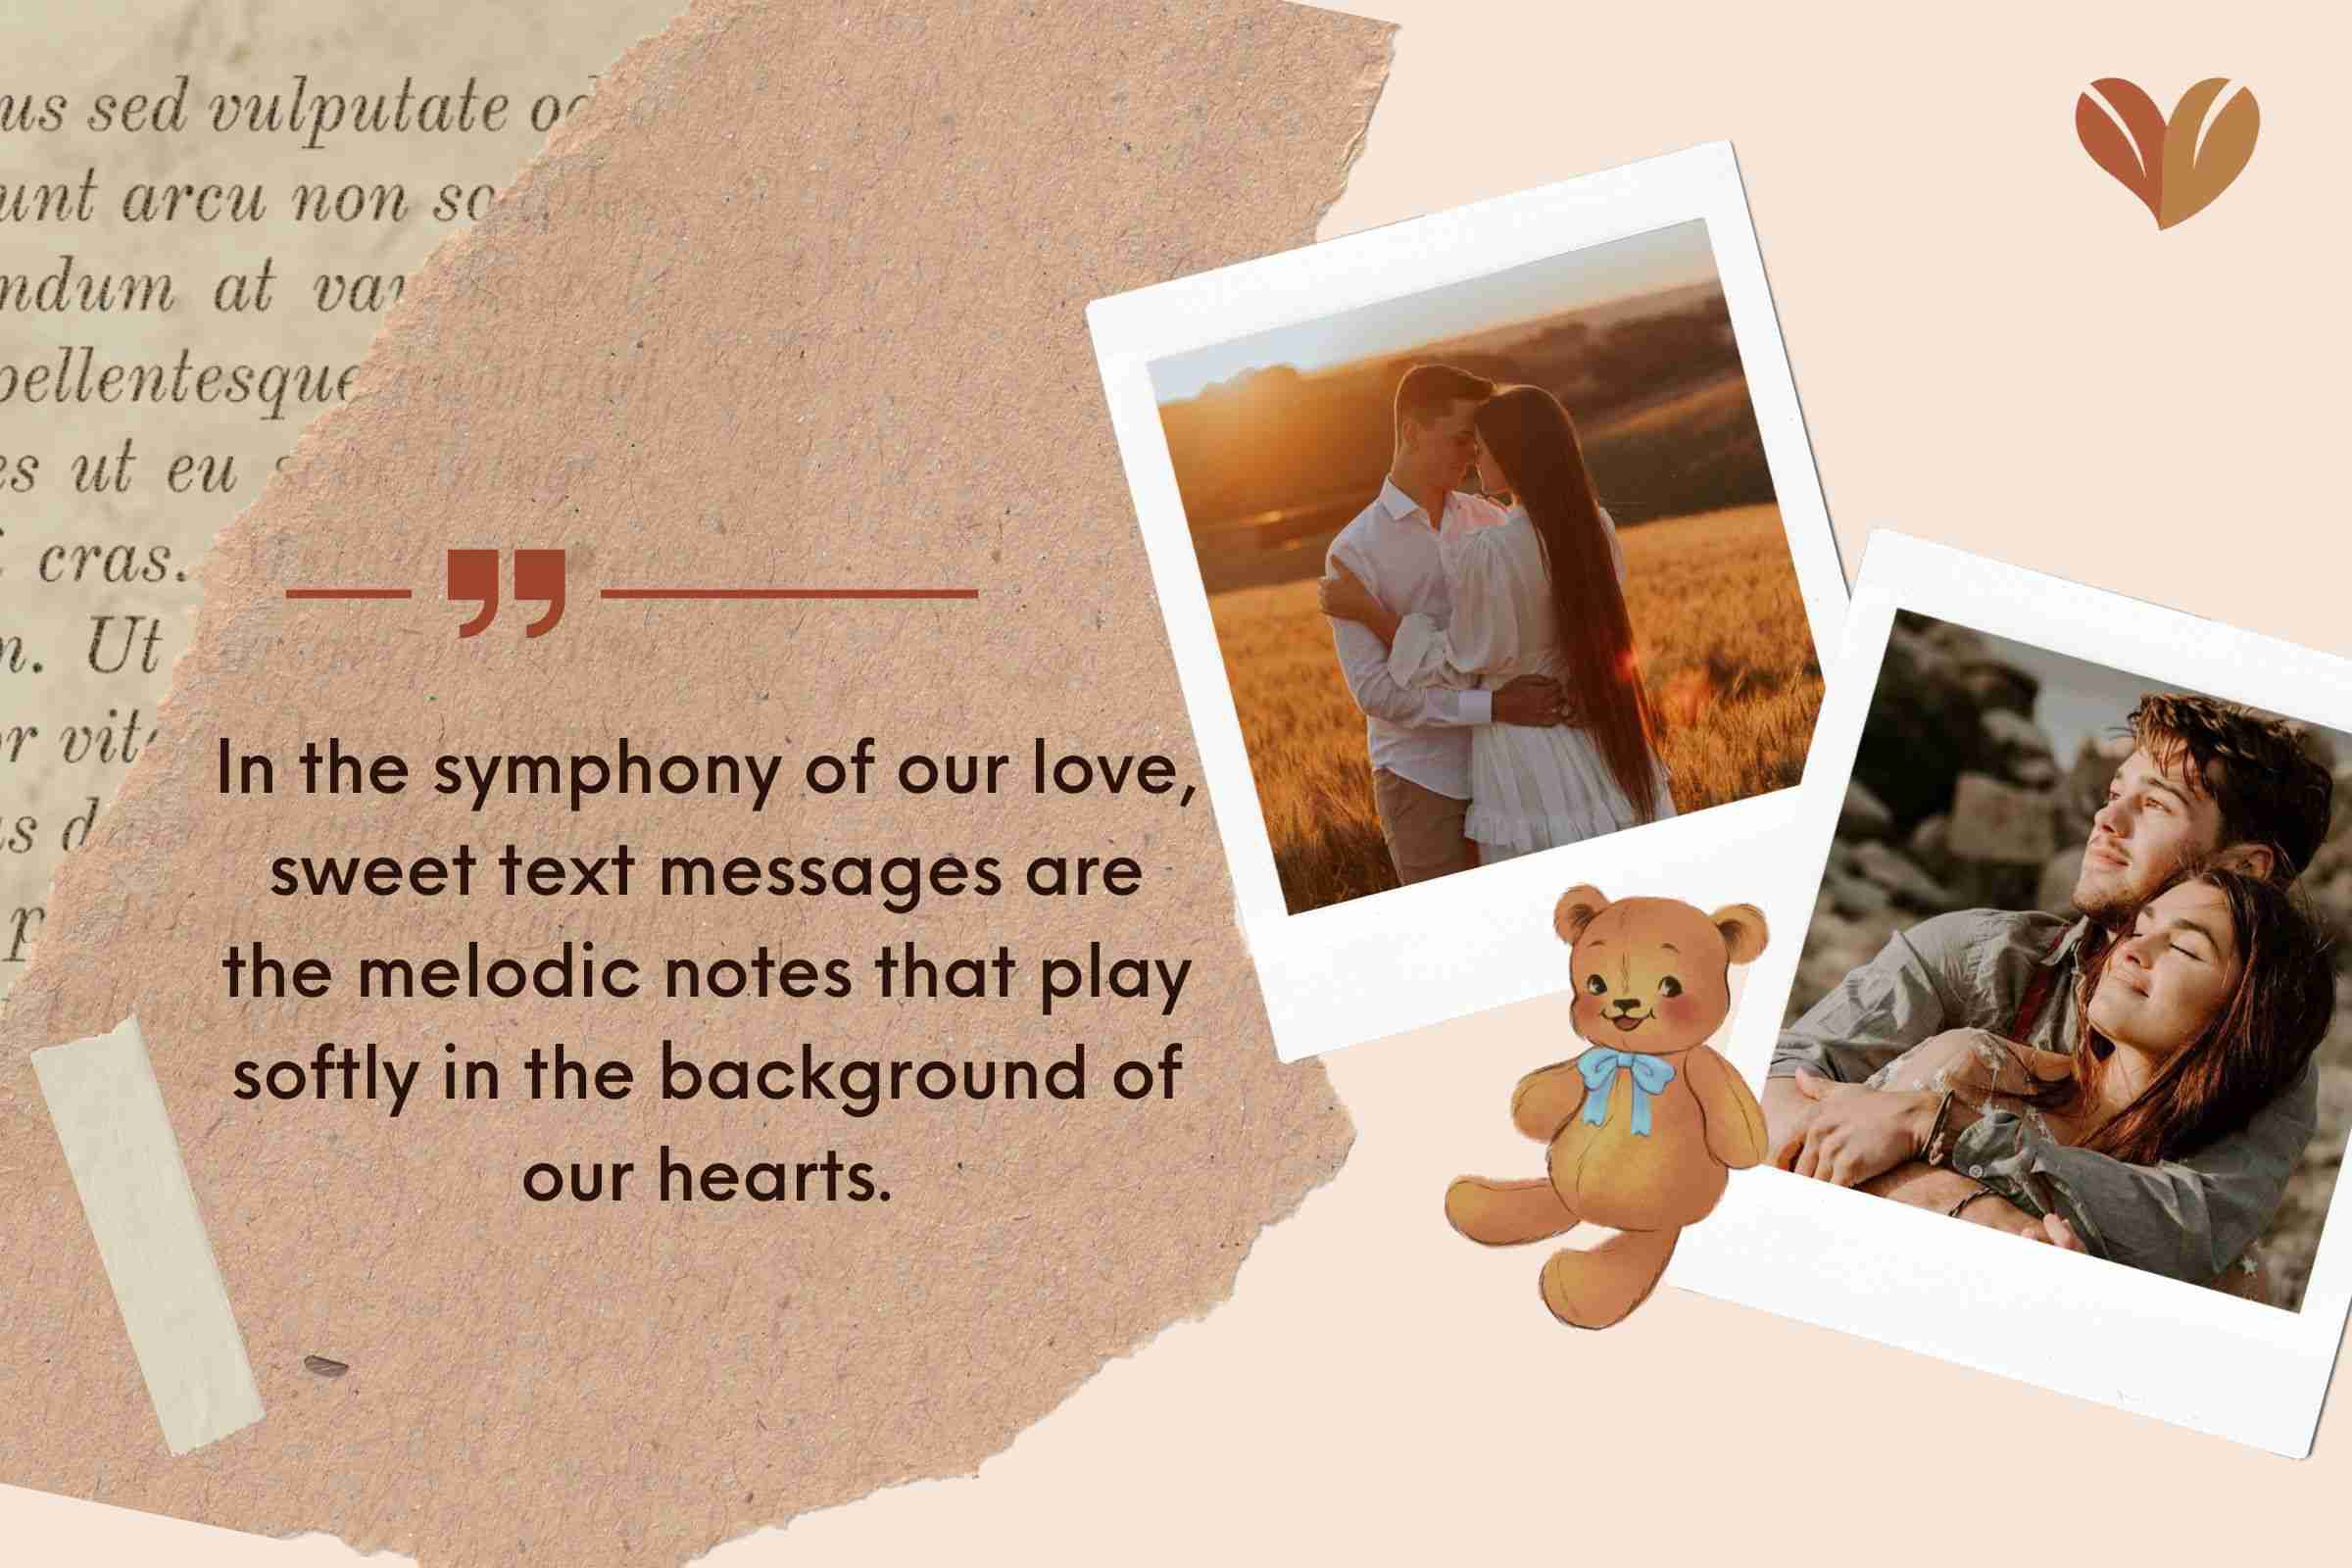 In the symphony of our love, sweet text messages are the melodic notes that play softly in the background of our hearts.